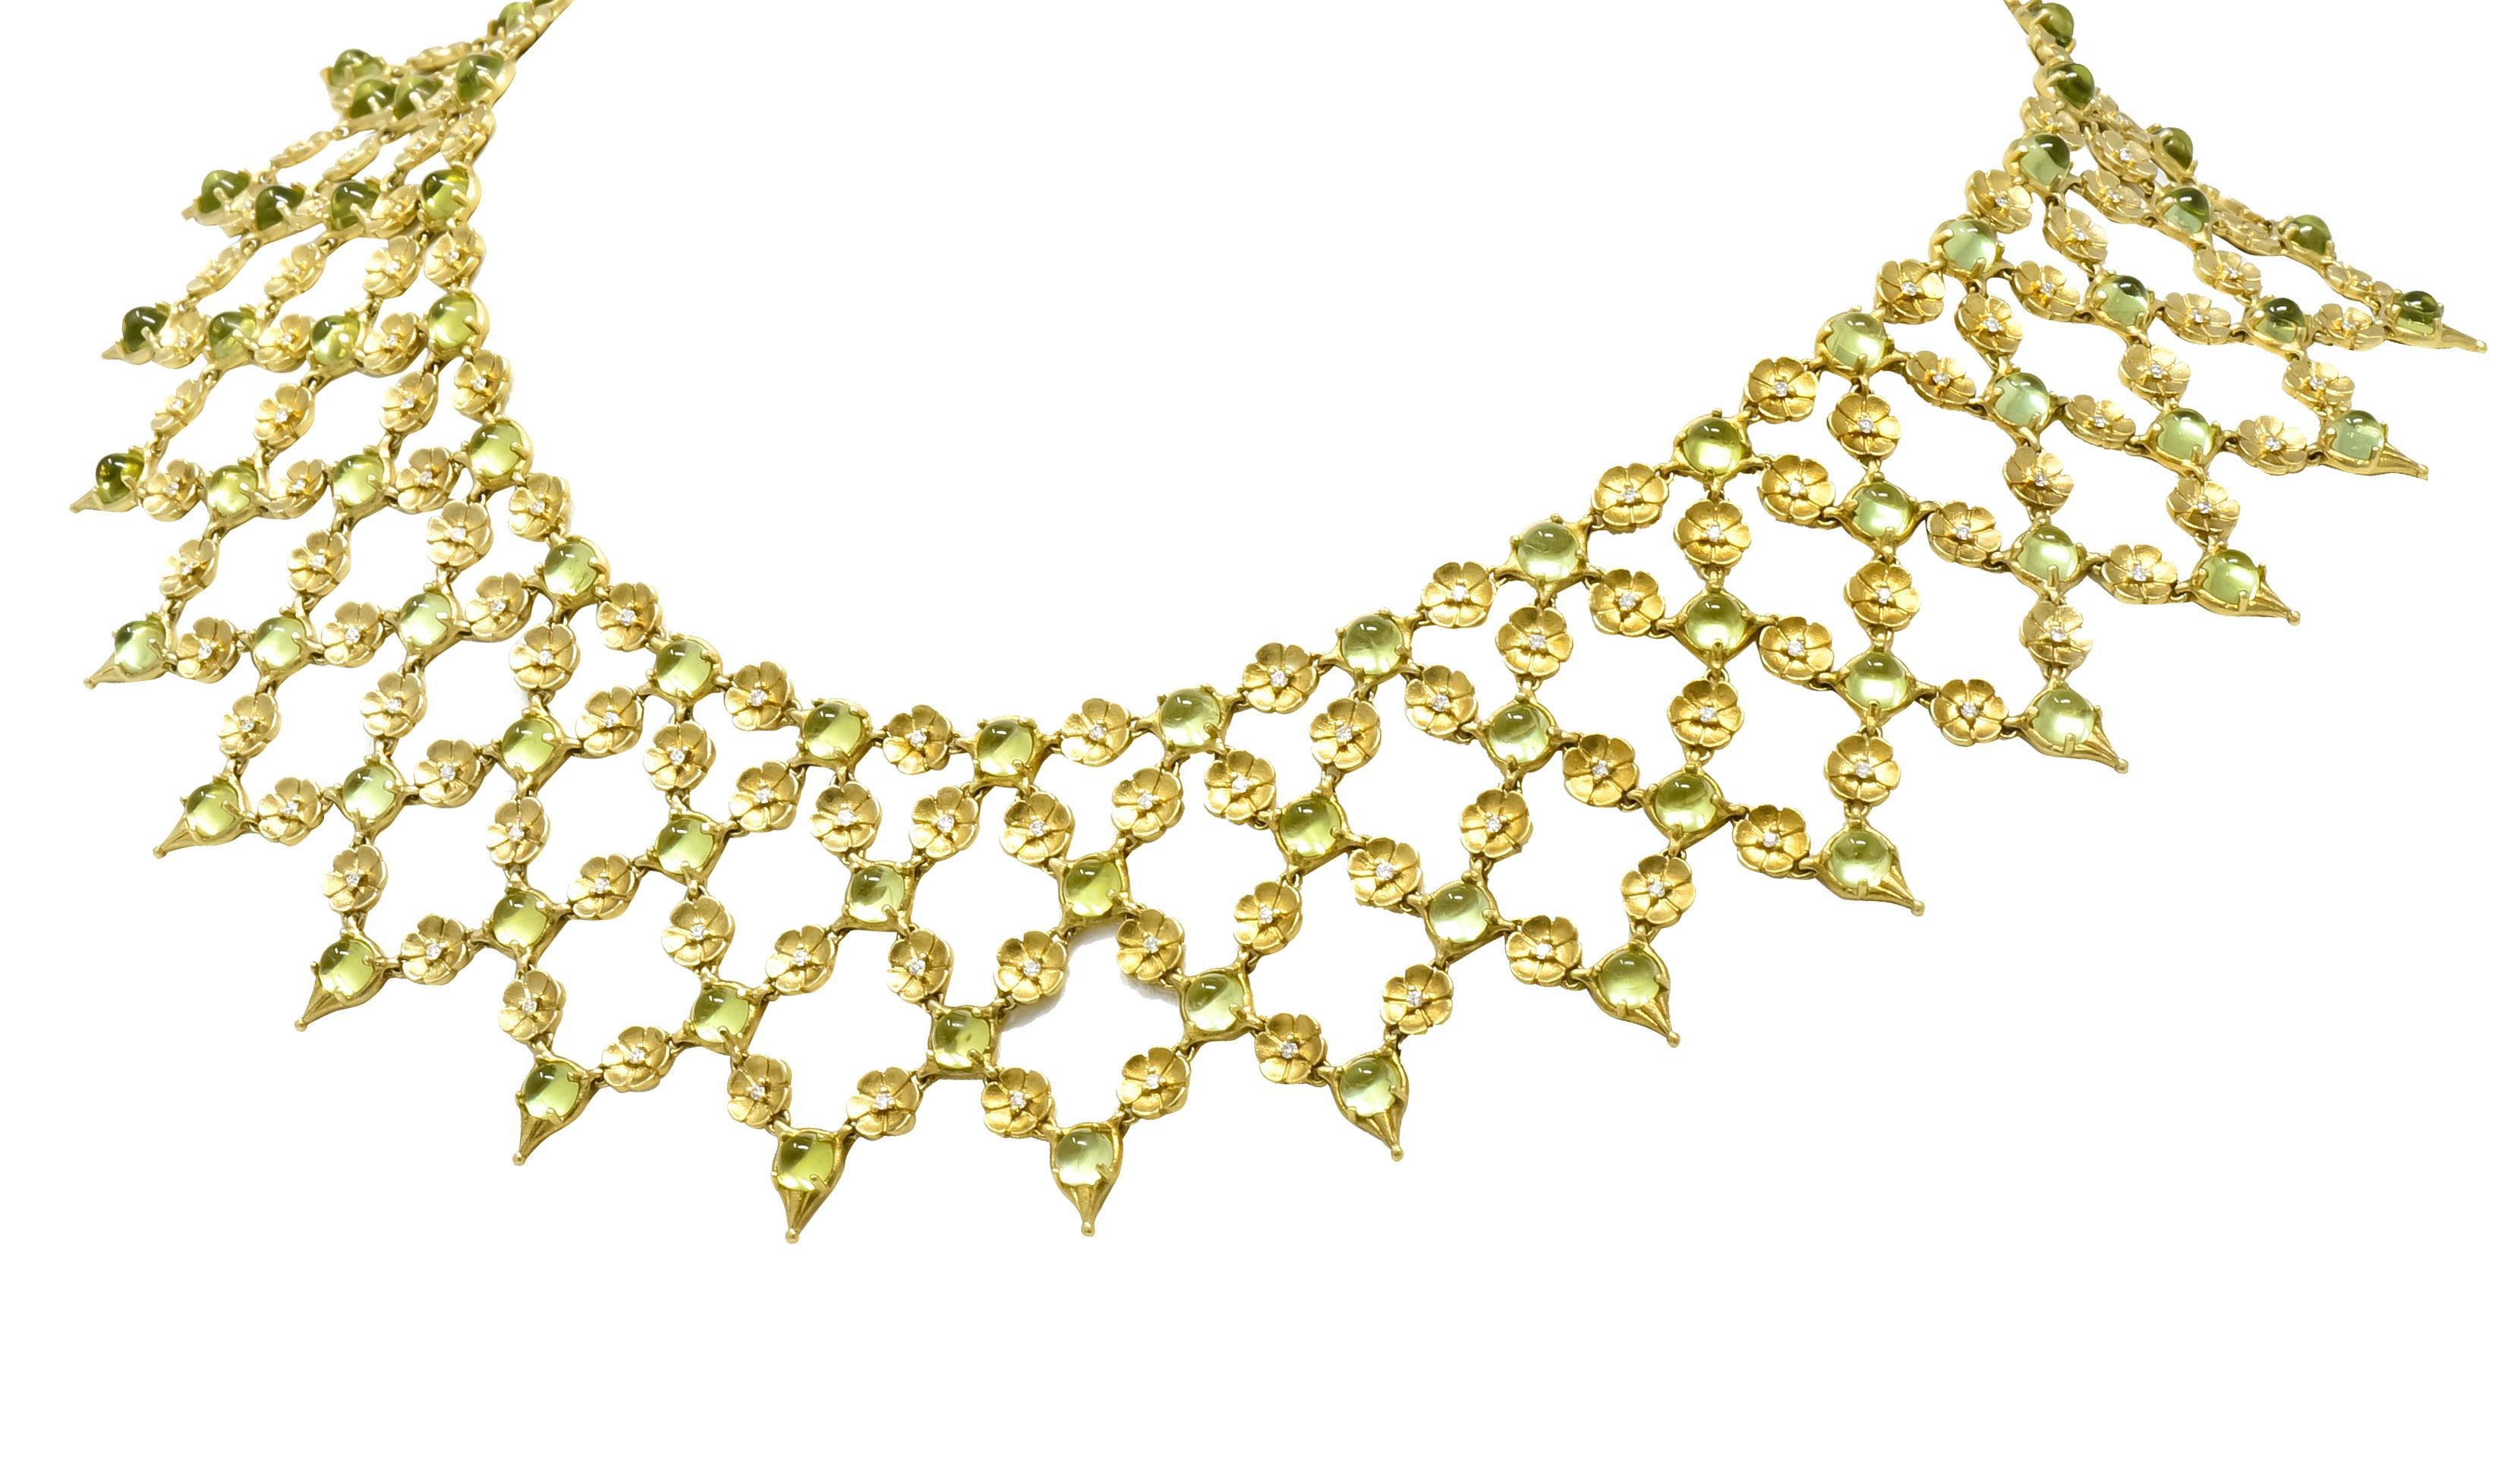 Fringe style necklace designed as small matte gold flowers creating a mesh chain link formation with pointed drops

Set throughout by prong set round cabochon peridot weighing approximately 30.52 carat total, transparent and light yellowish green in